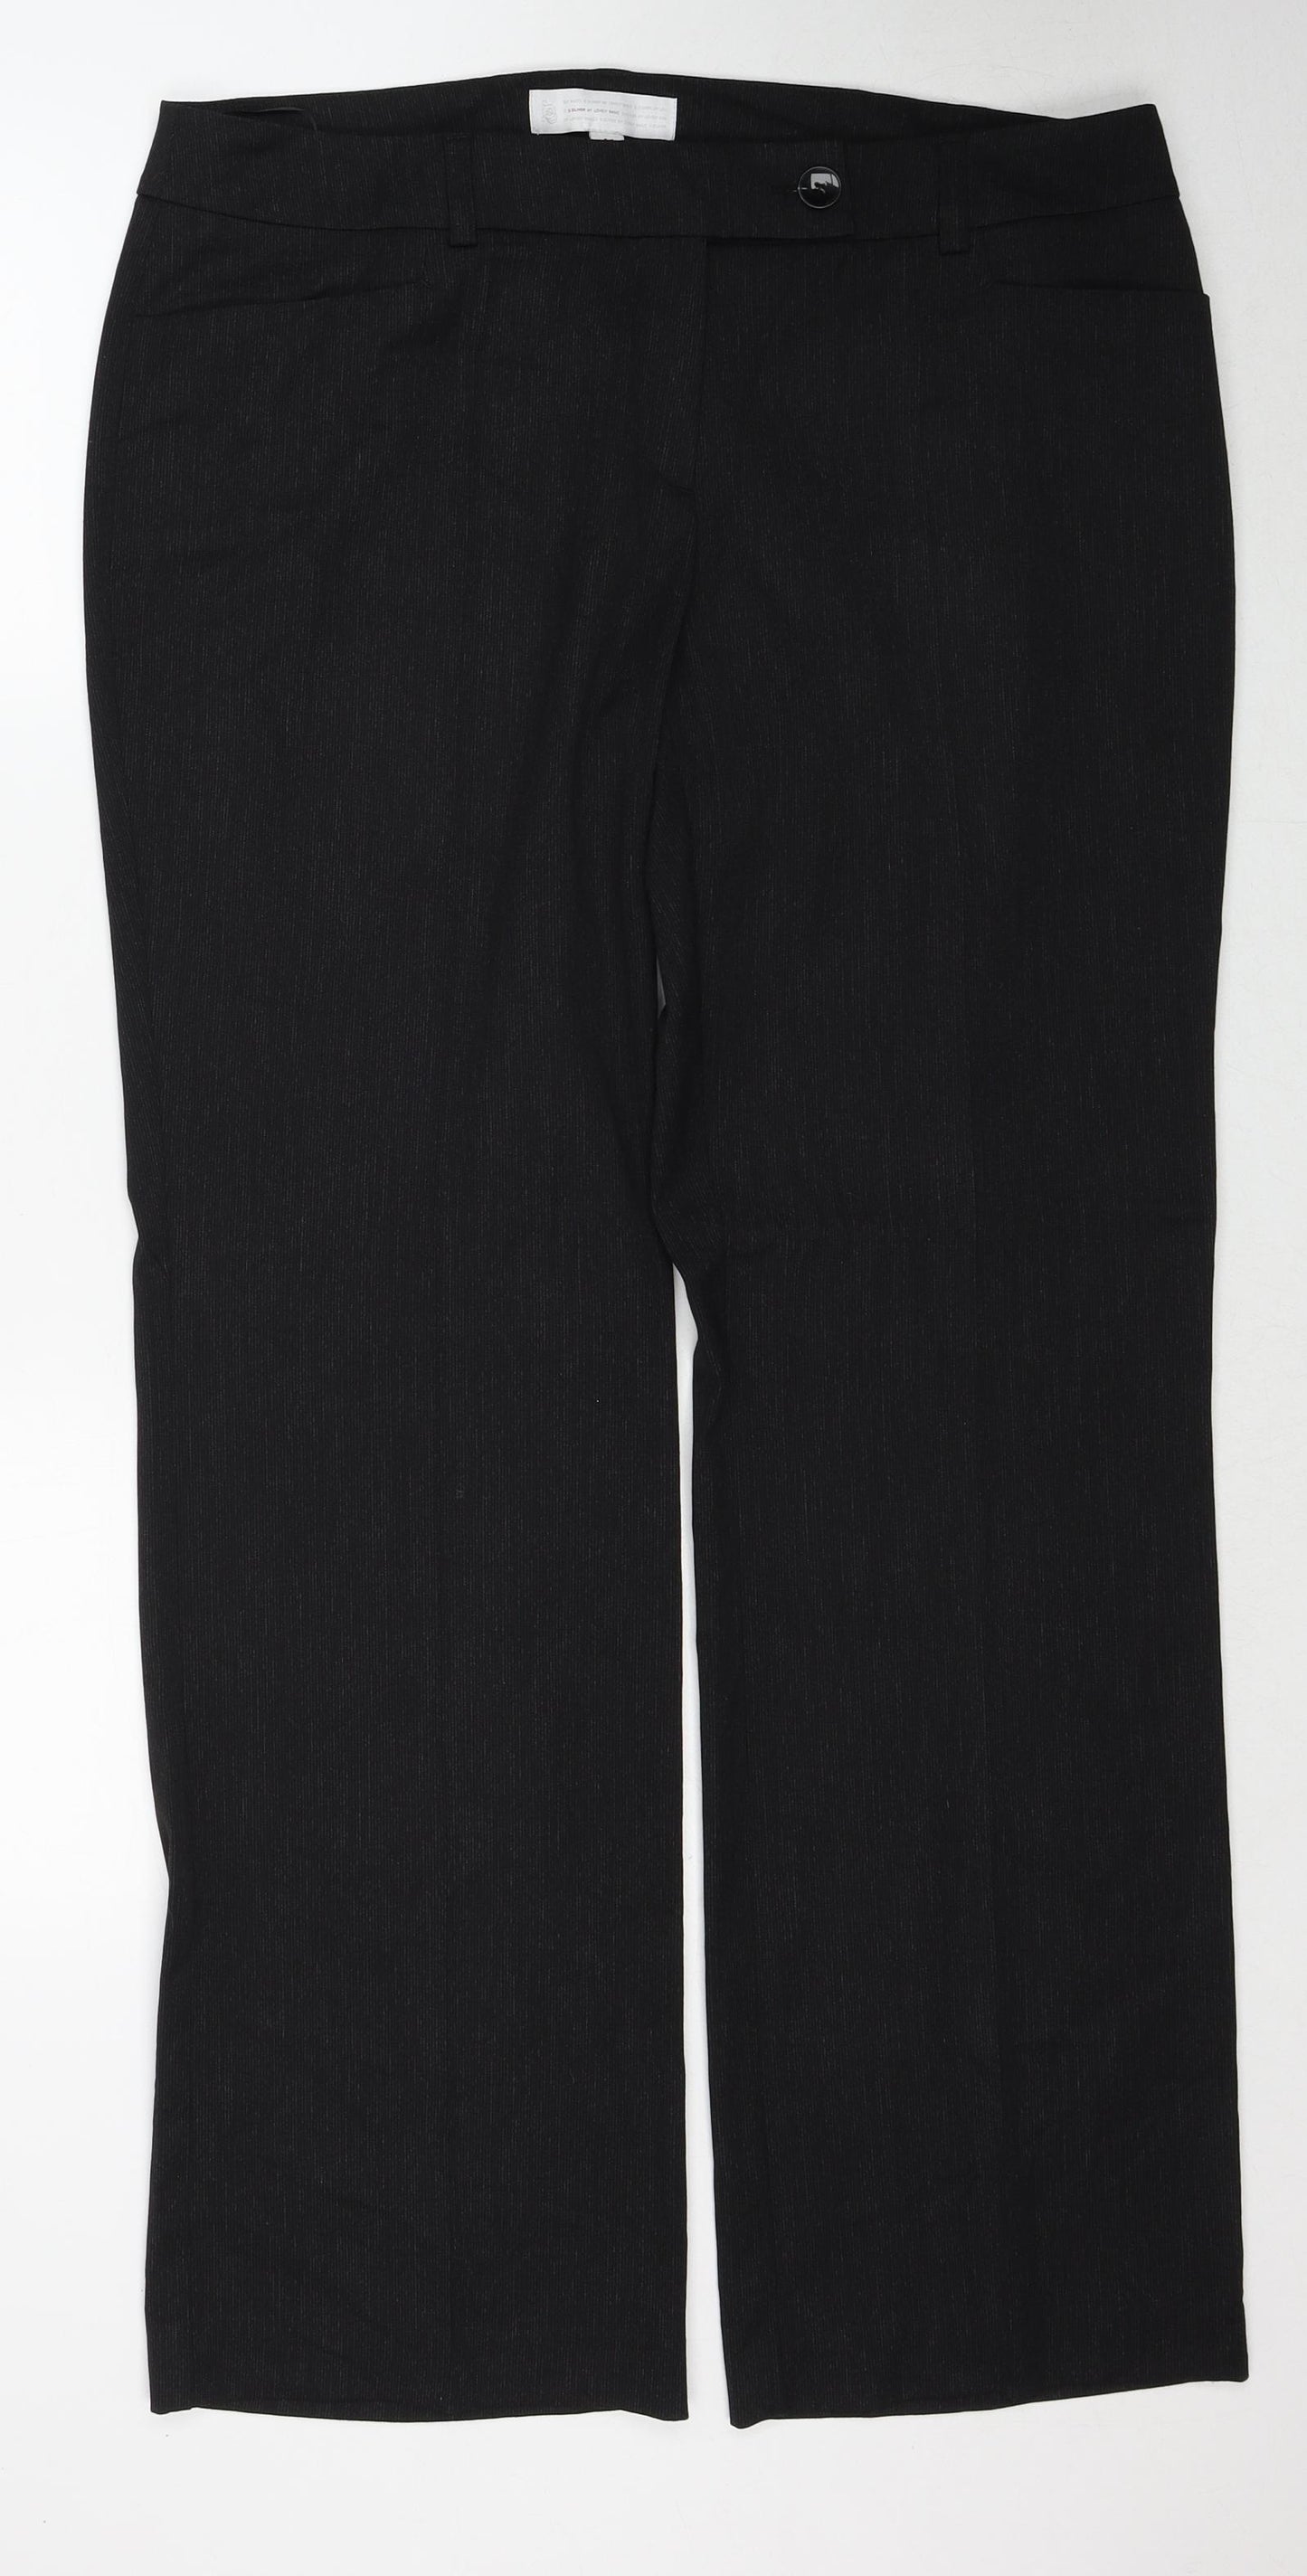 s.Oliver Womens Black Polyester Dress Pants Trousers Size 18 Regular Zip